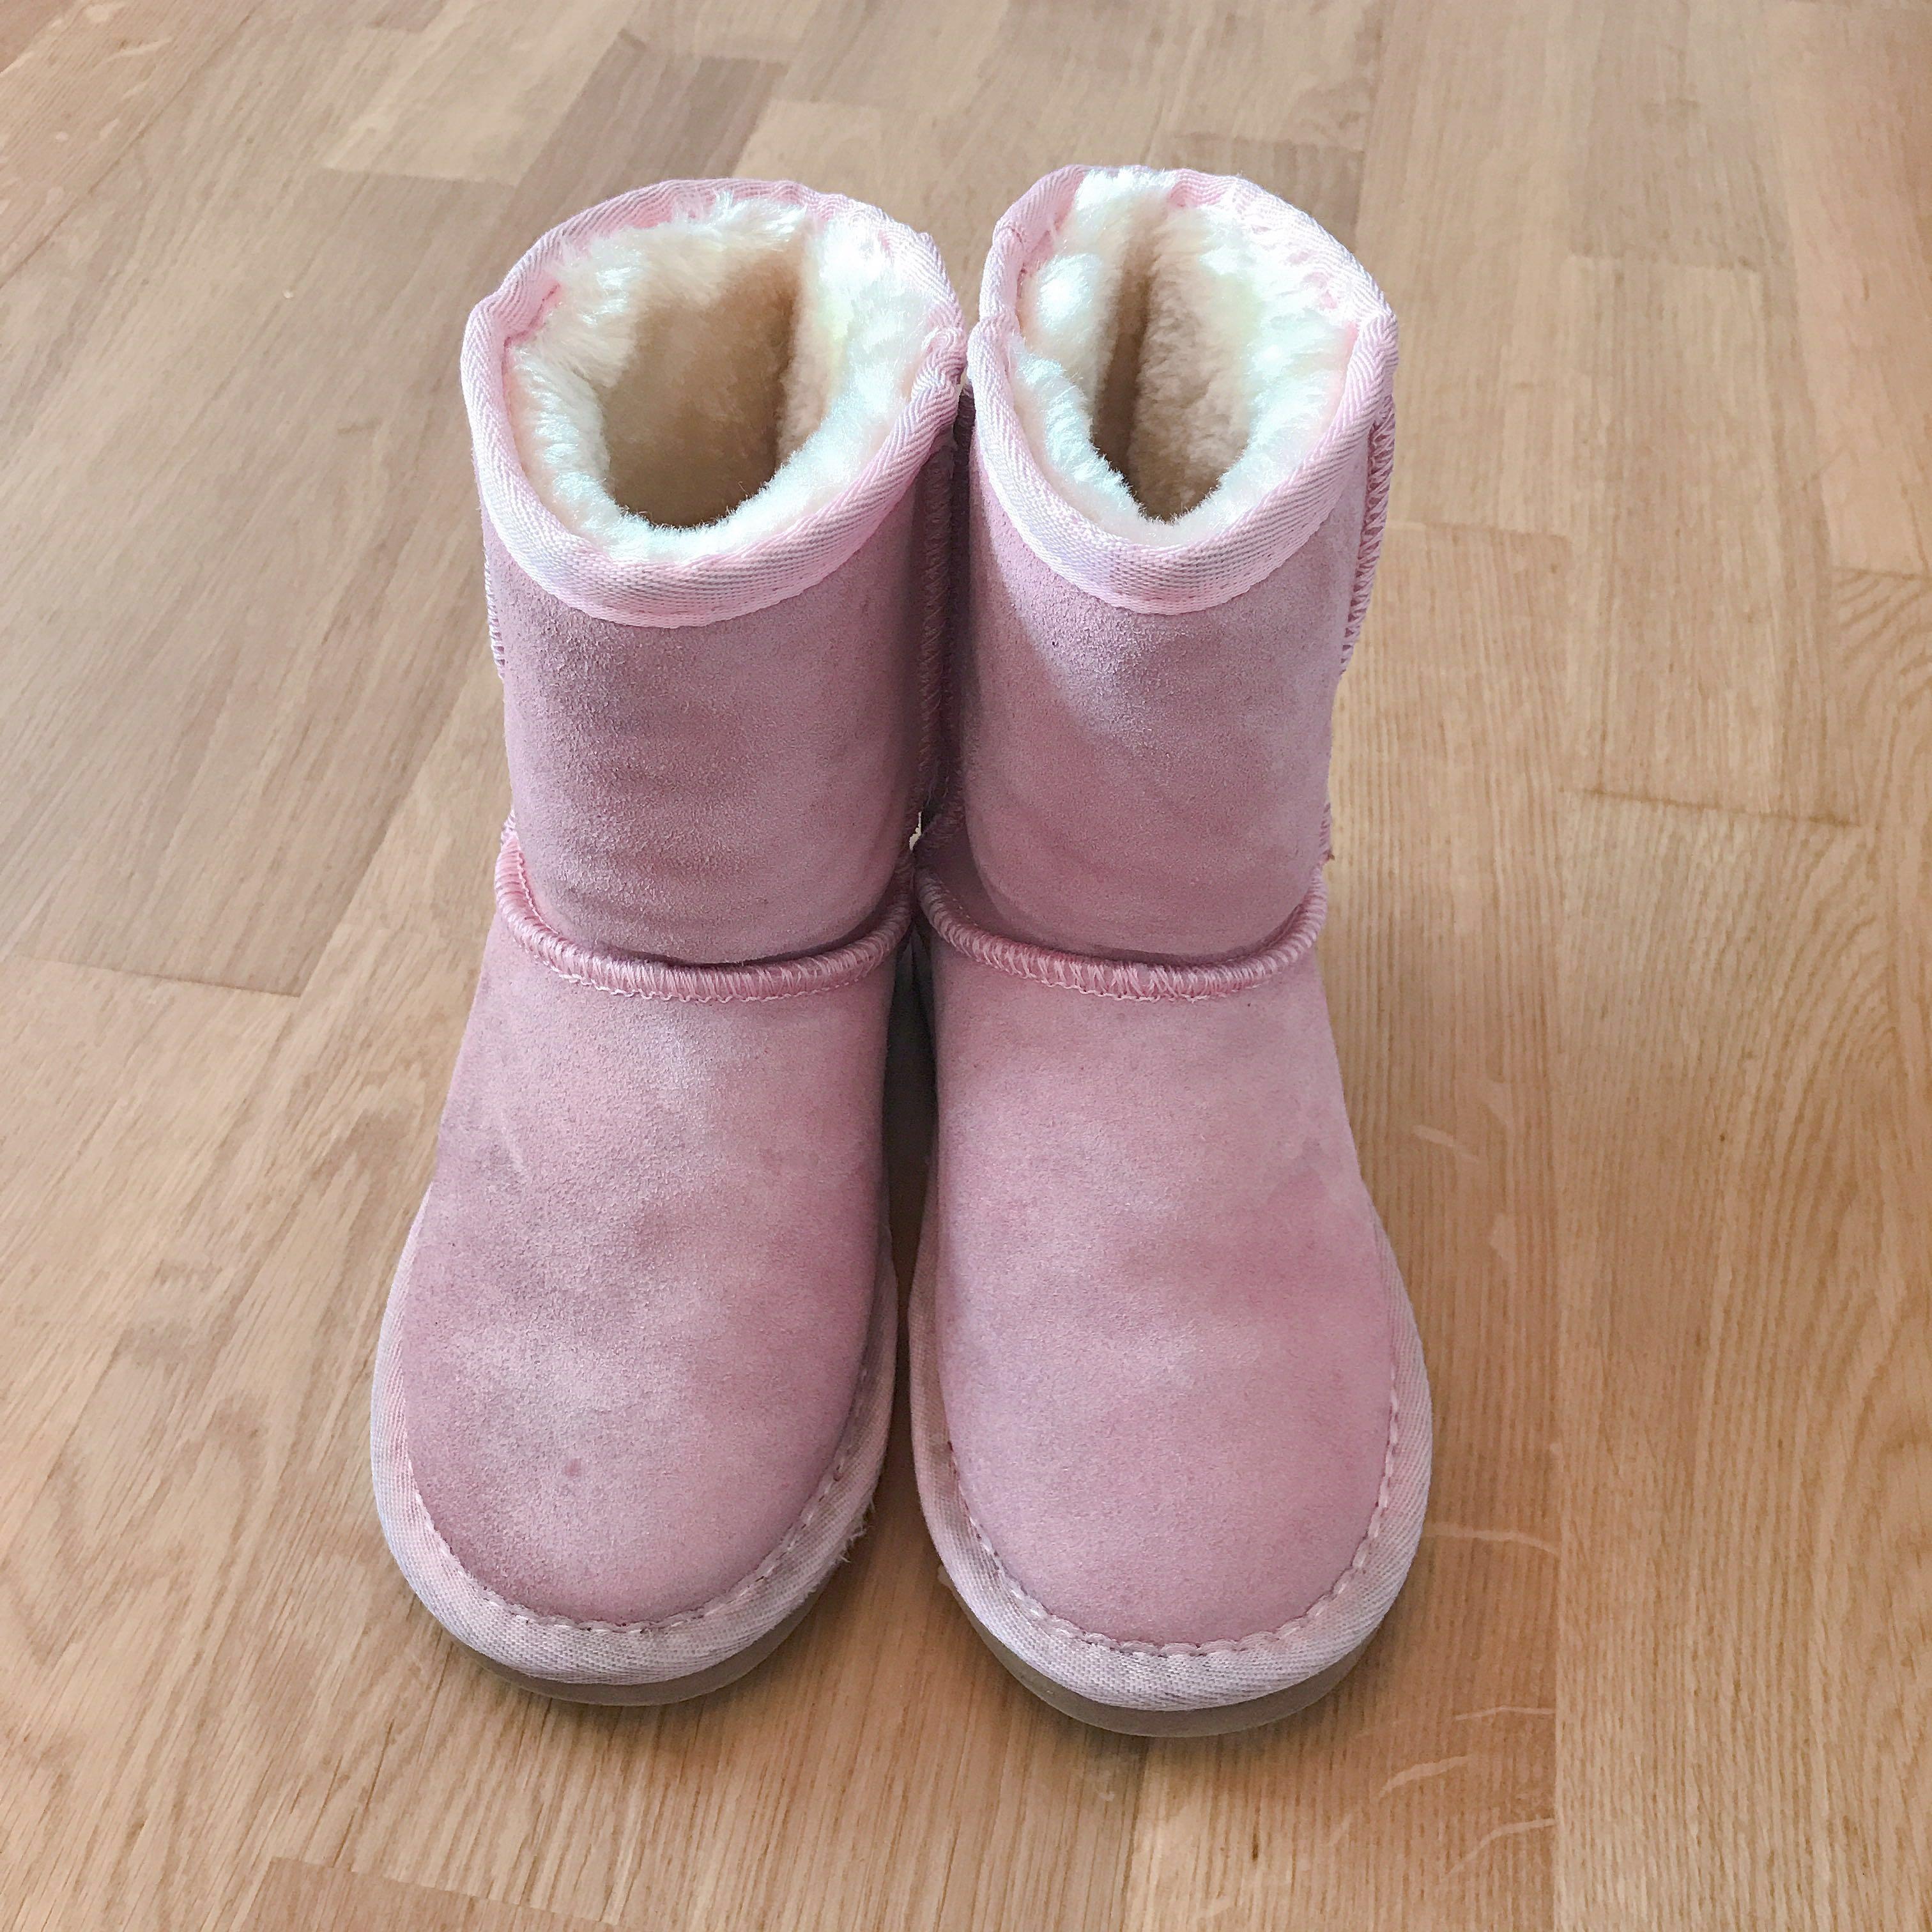 childrens ugg boots size 4